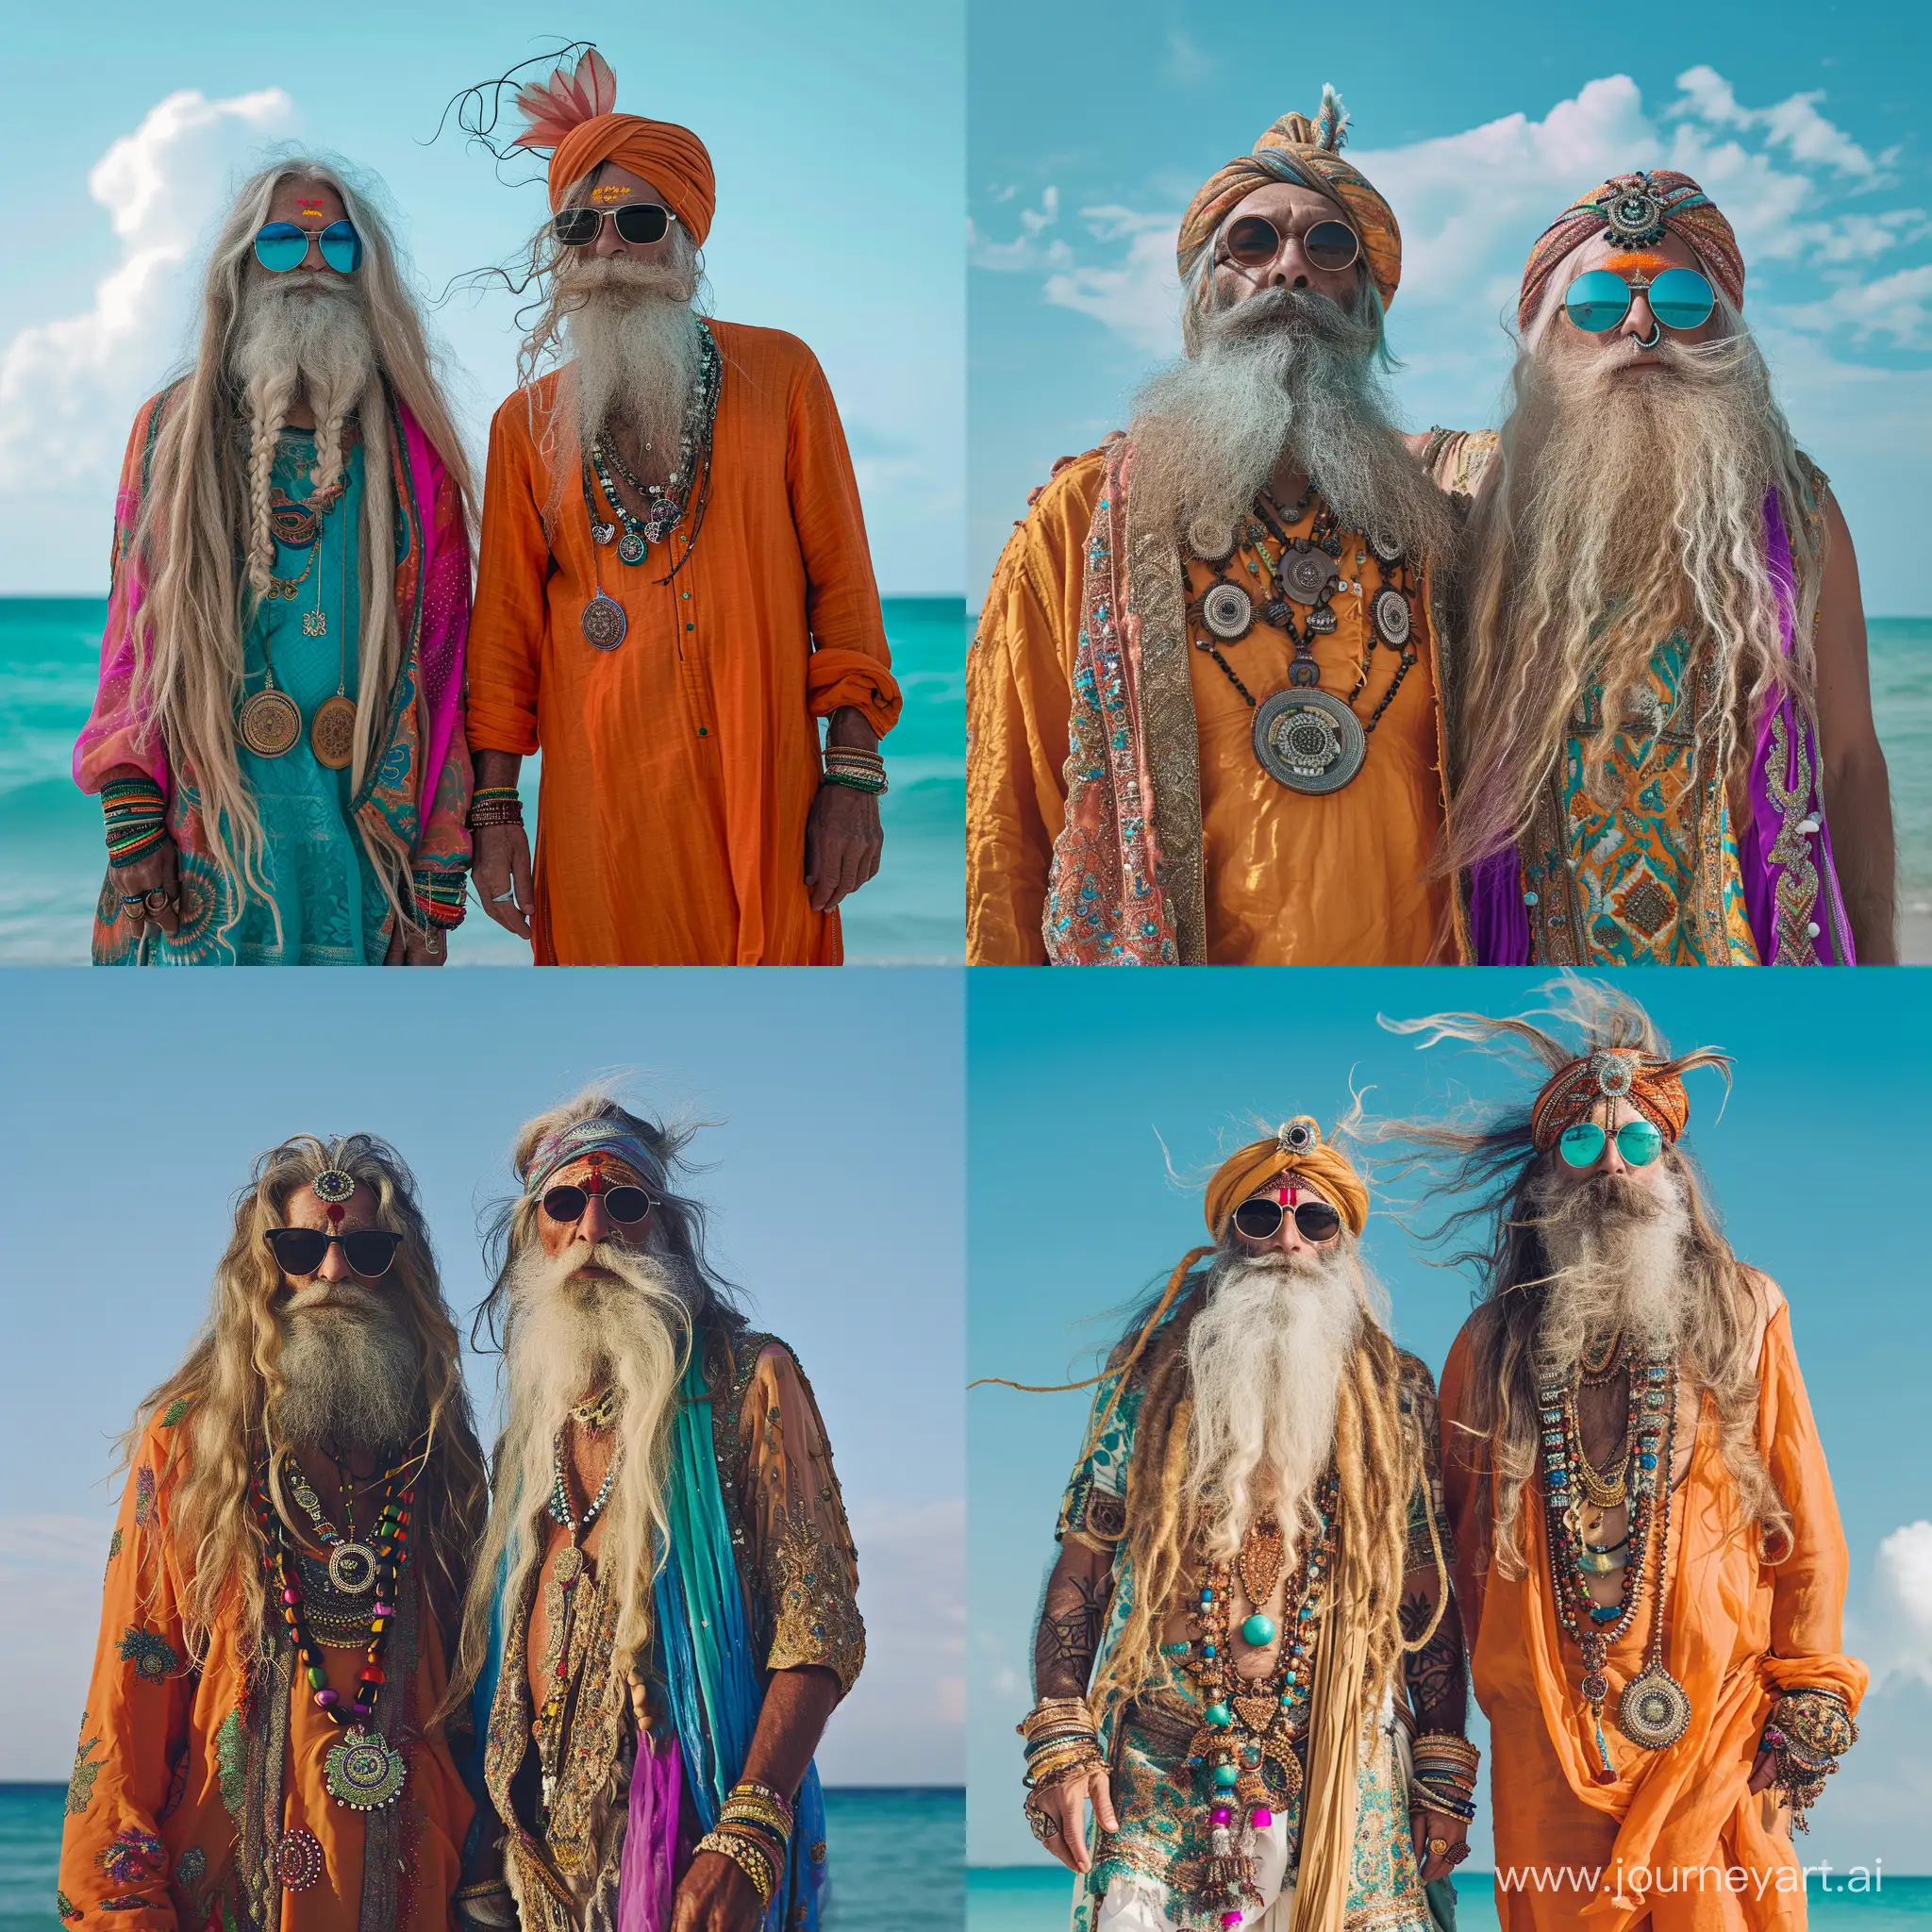   to  80 years old skiny hippies colorfull  wild long hair and long beard old fashion sunglasses  in india dress  standing at the beach  sky  bleu  fotorealistisch 50mm fuji xt2 